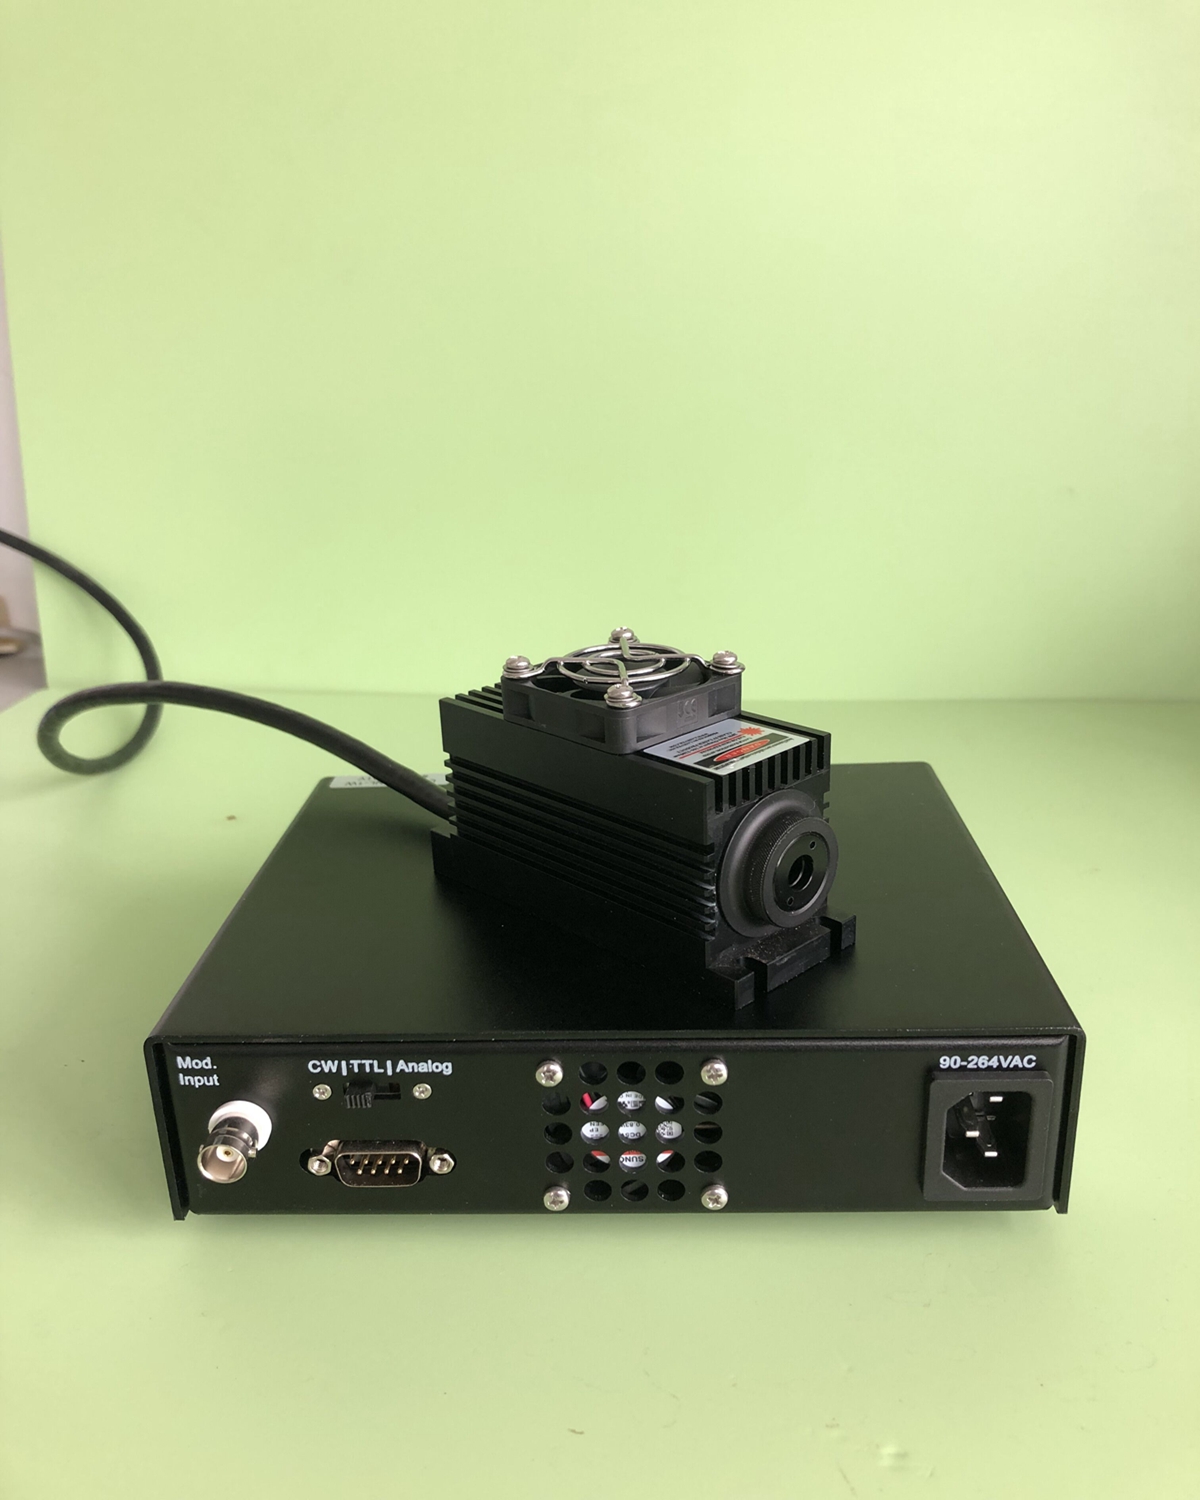 1064nm 1000mW infrared solid-state laser